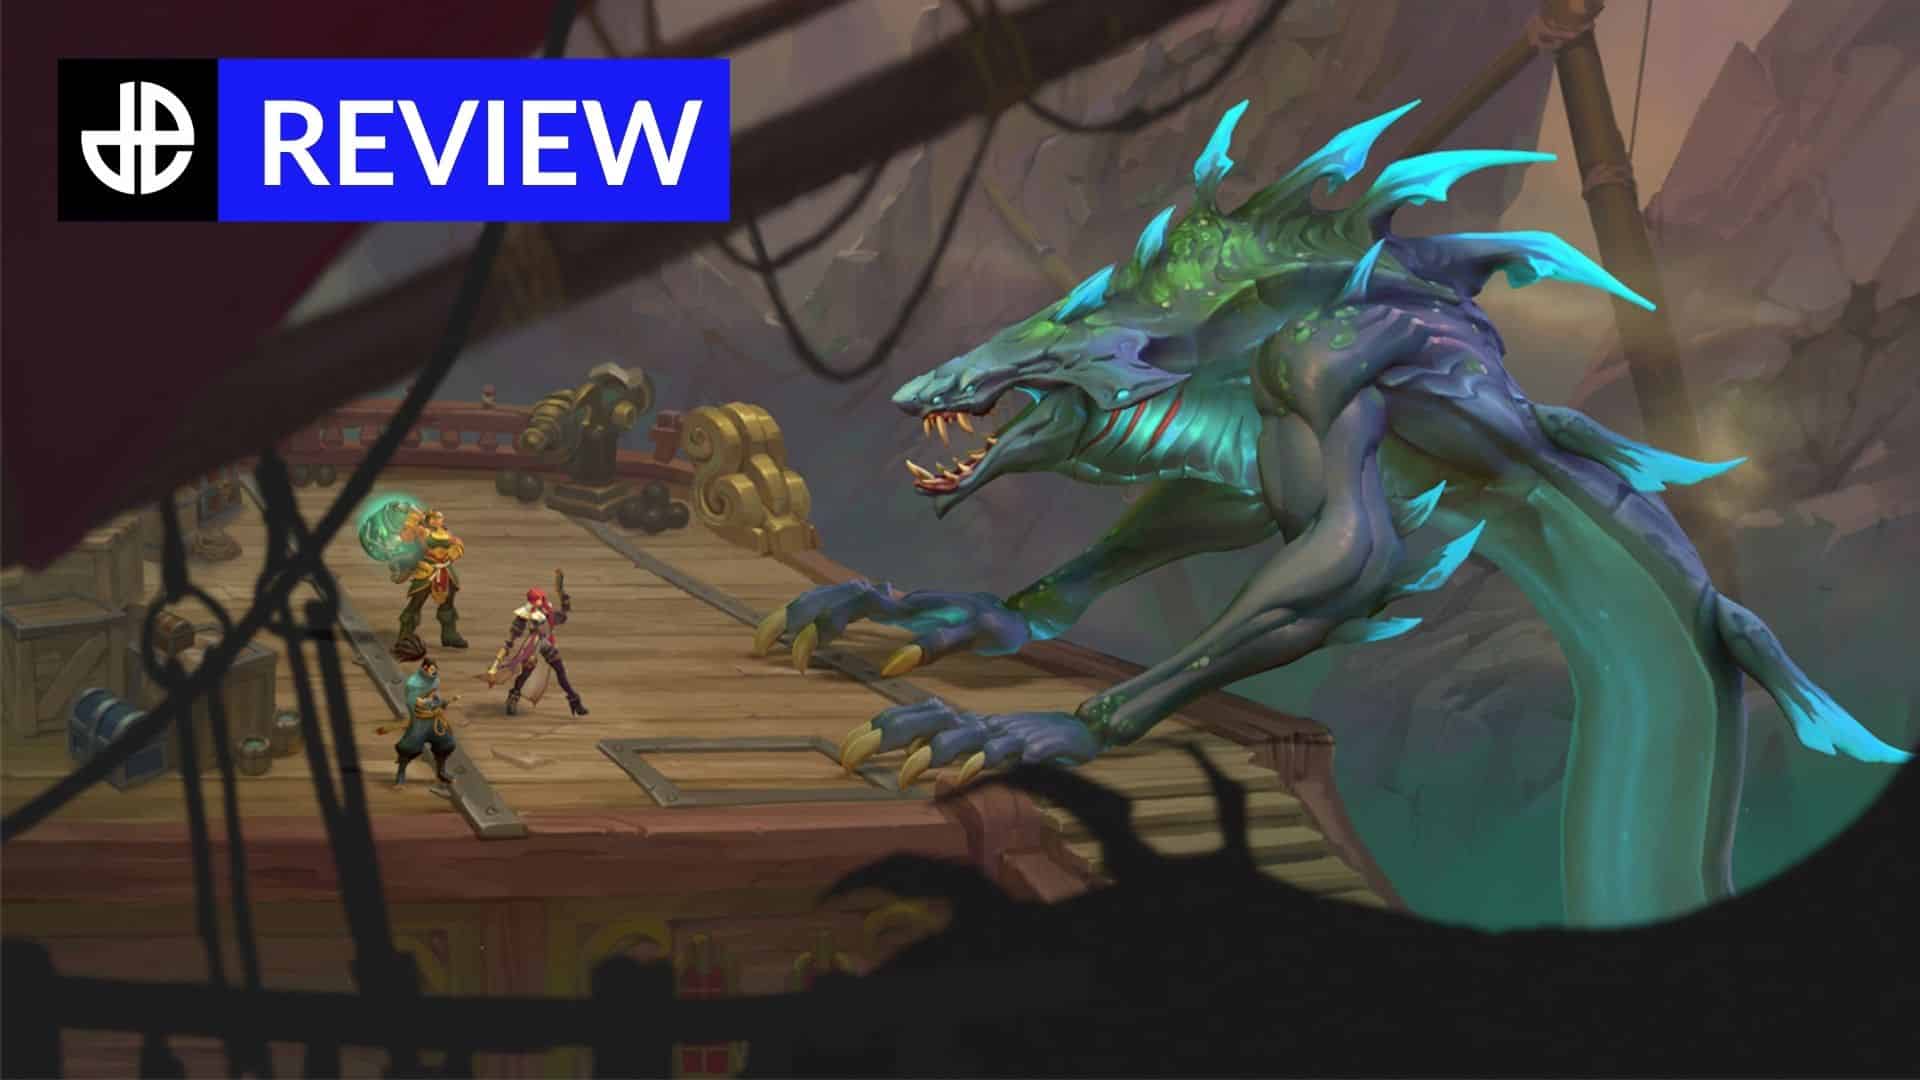 League of Legends: Wild Rift Showcased In-Depth - Here's What We